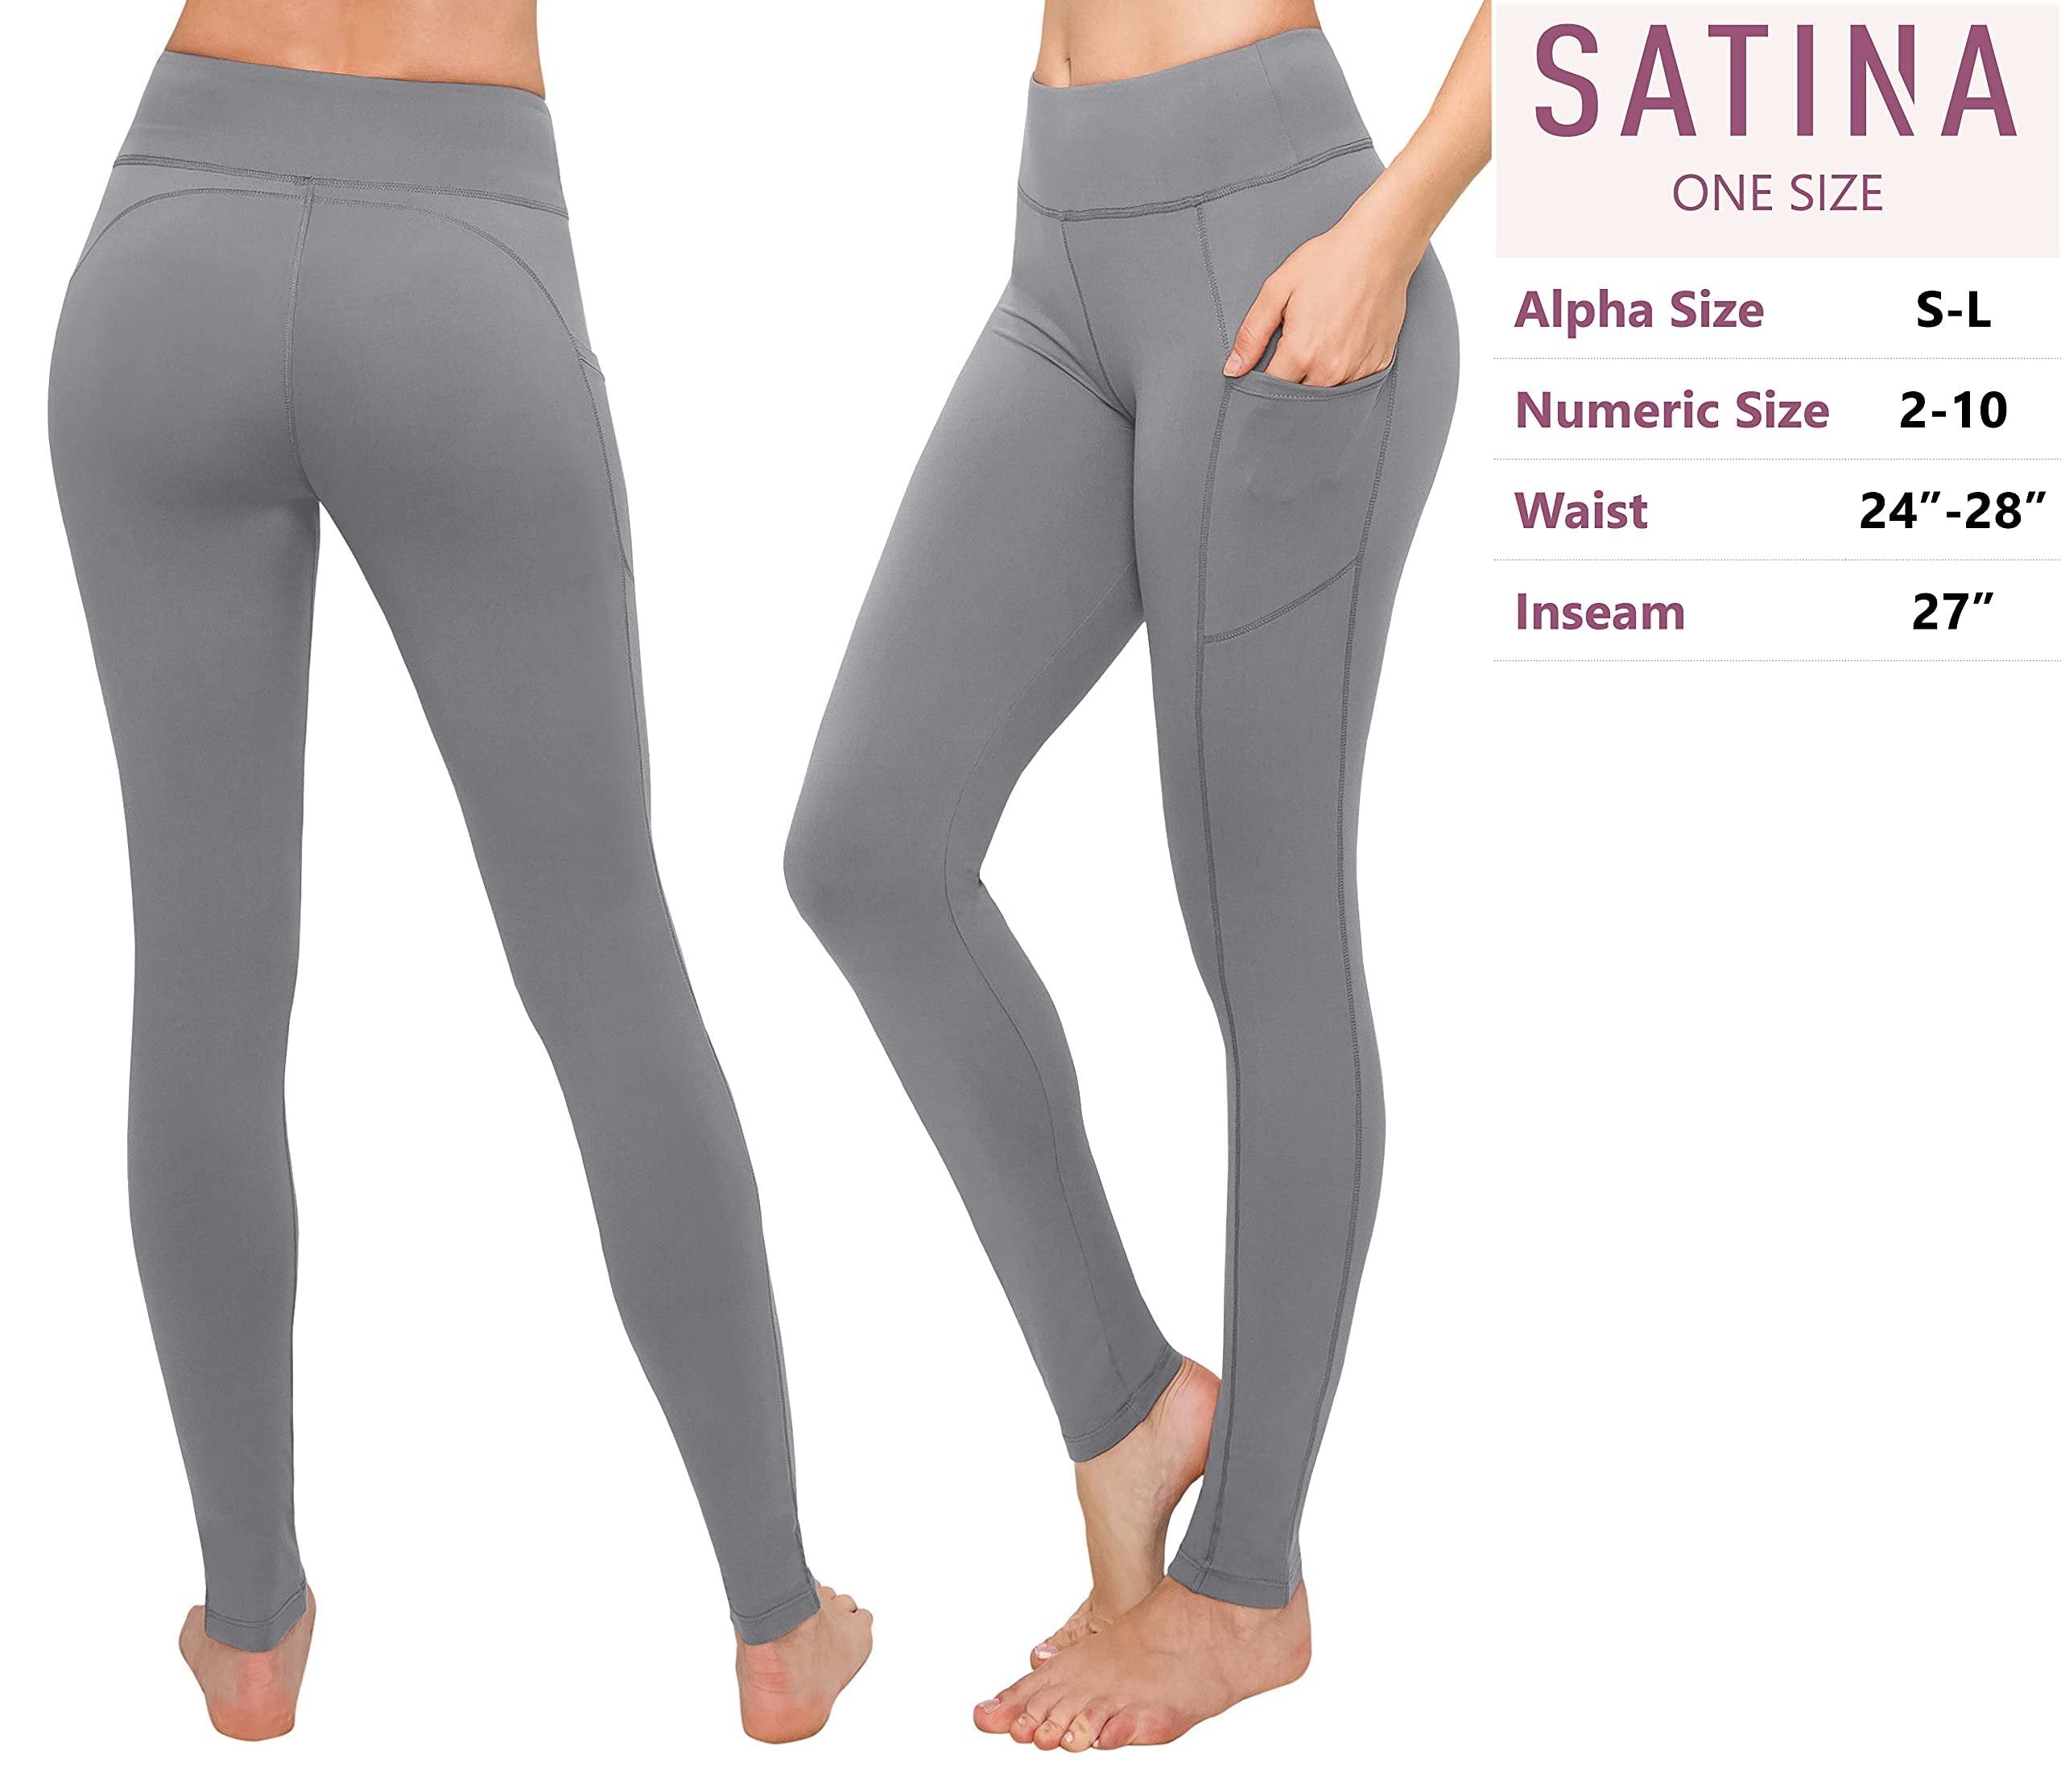 SATINA High Waisted Leggings with Pockets for Women - Workout Leggings for Regular & Plus Size Women - Gray Leggings Women - Yoga Leggings for Women |3 Inch Waistband (Plus Size, Gray)